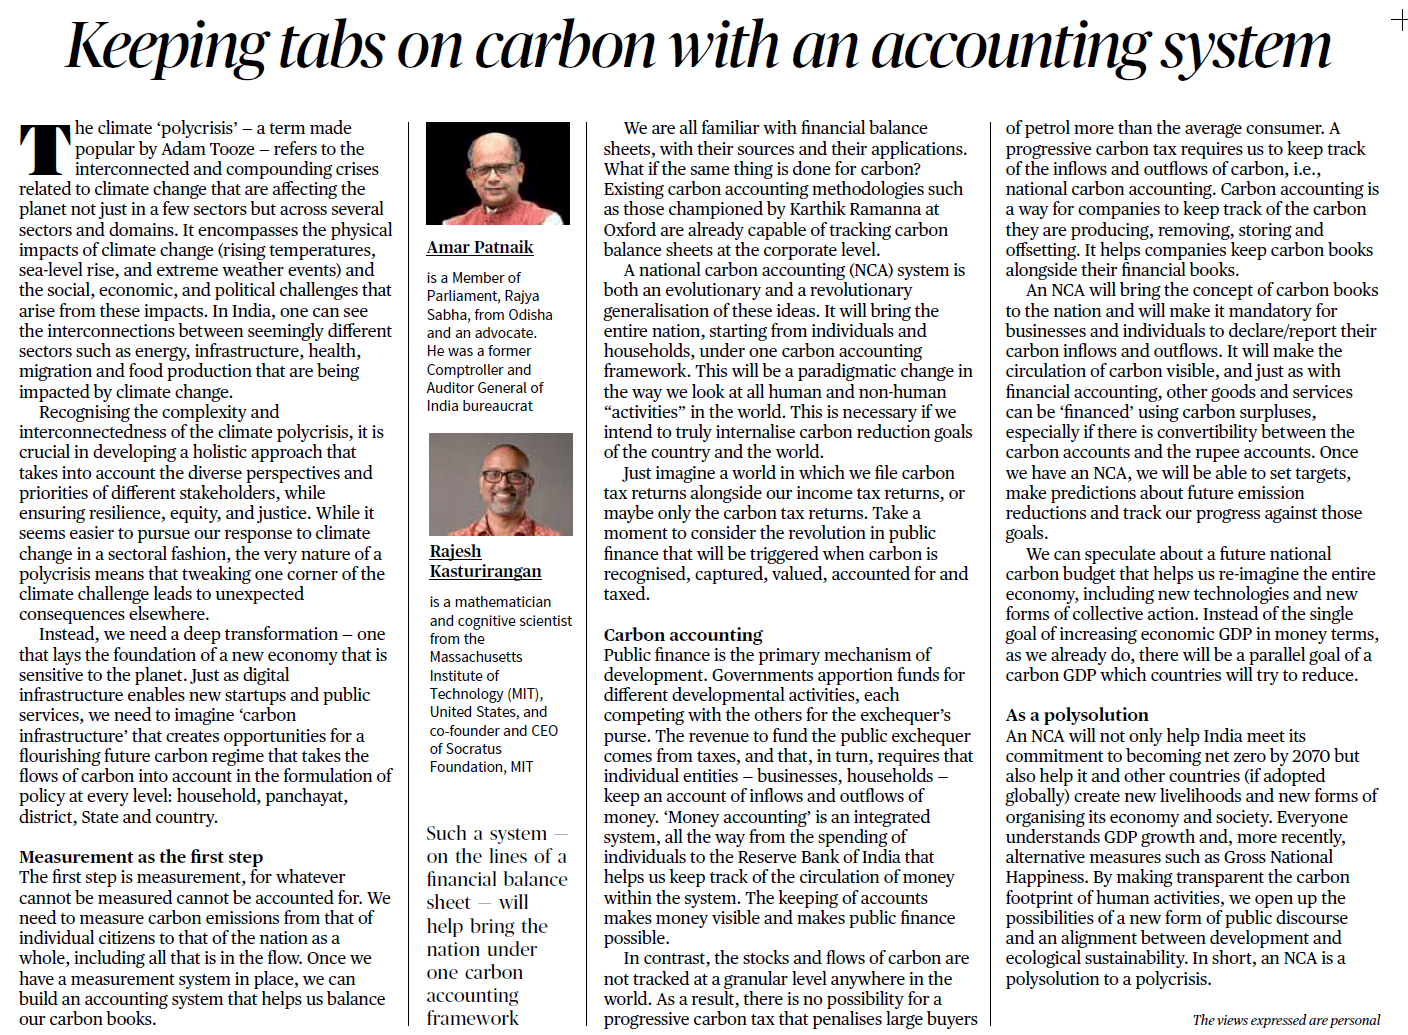 Keeping tabs on carbon with an accounting system